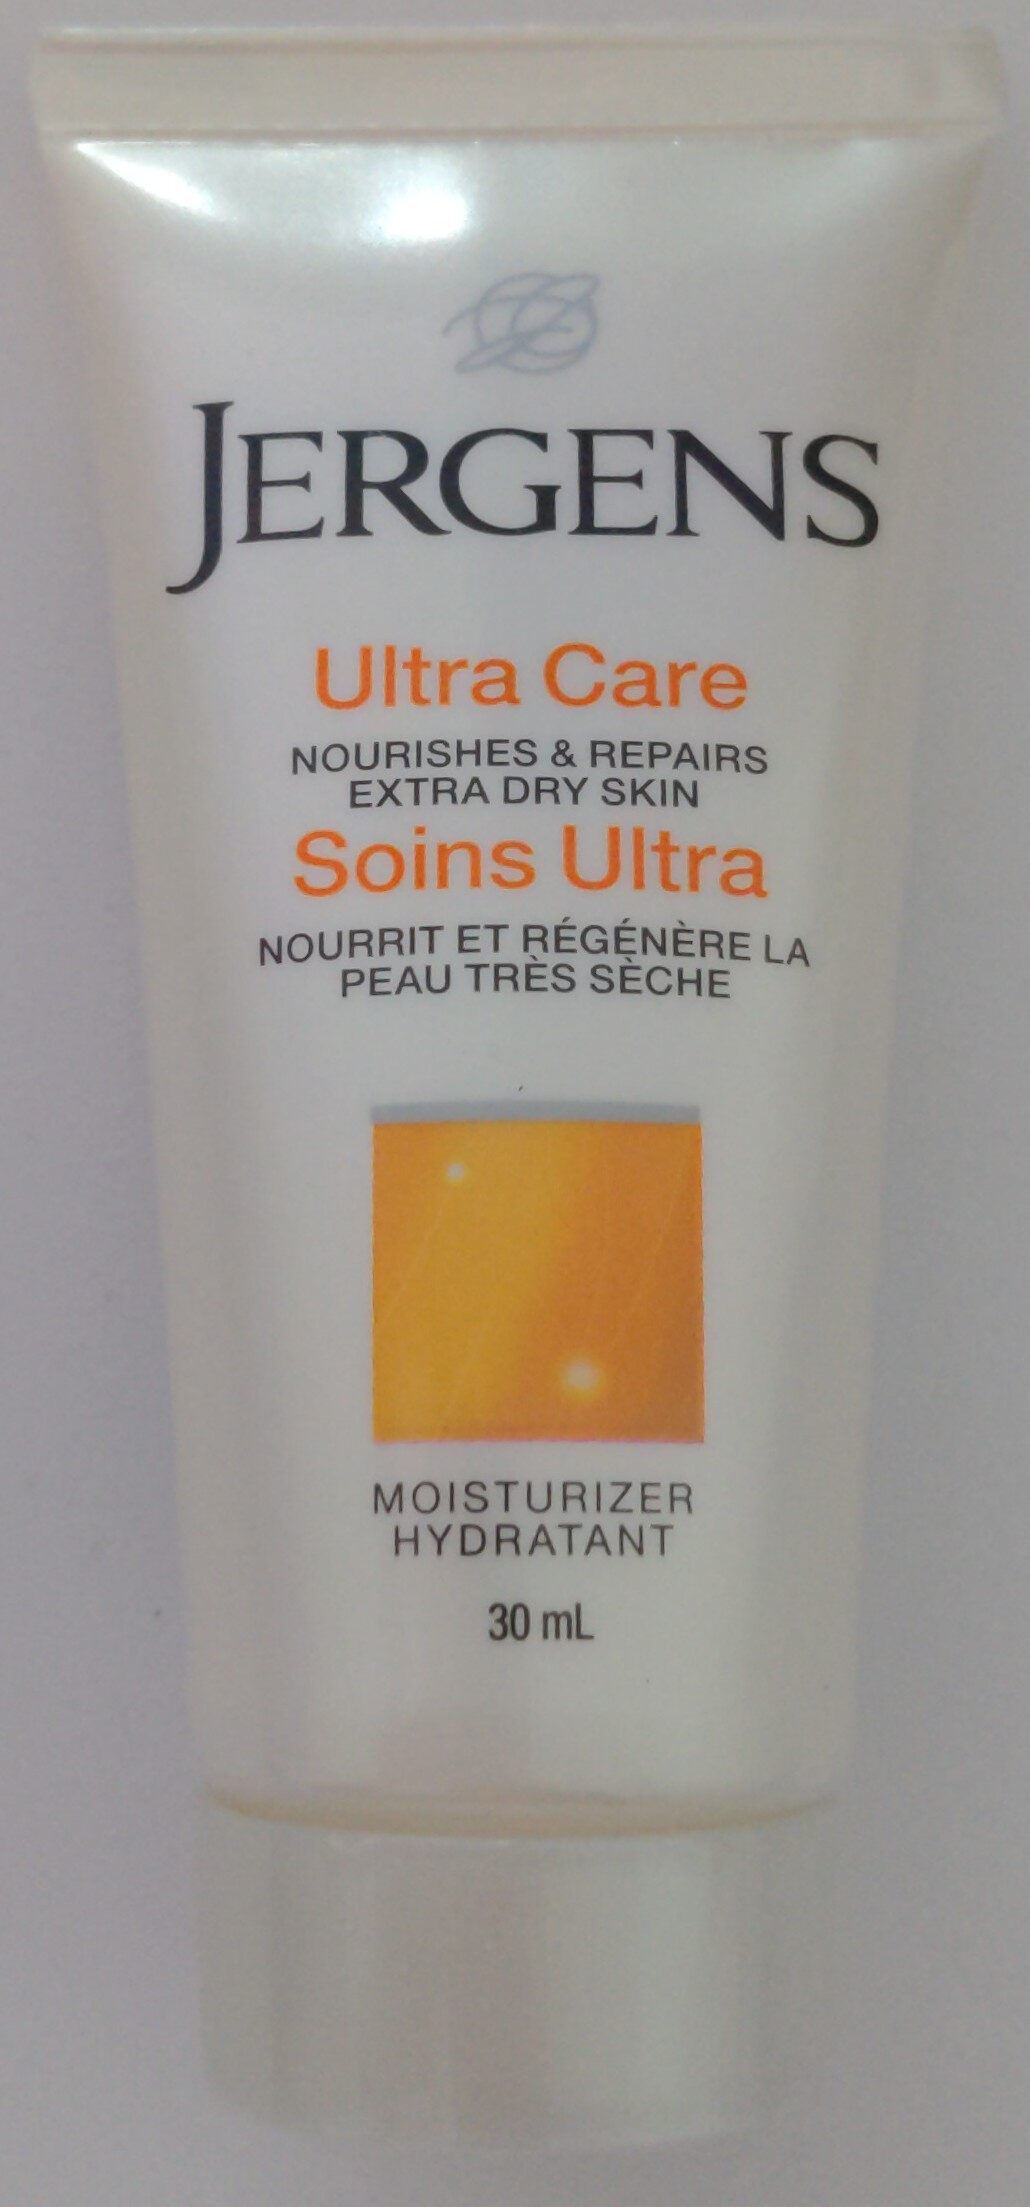 Soins Ultra - Tuote - fr